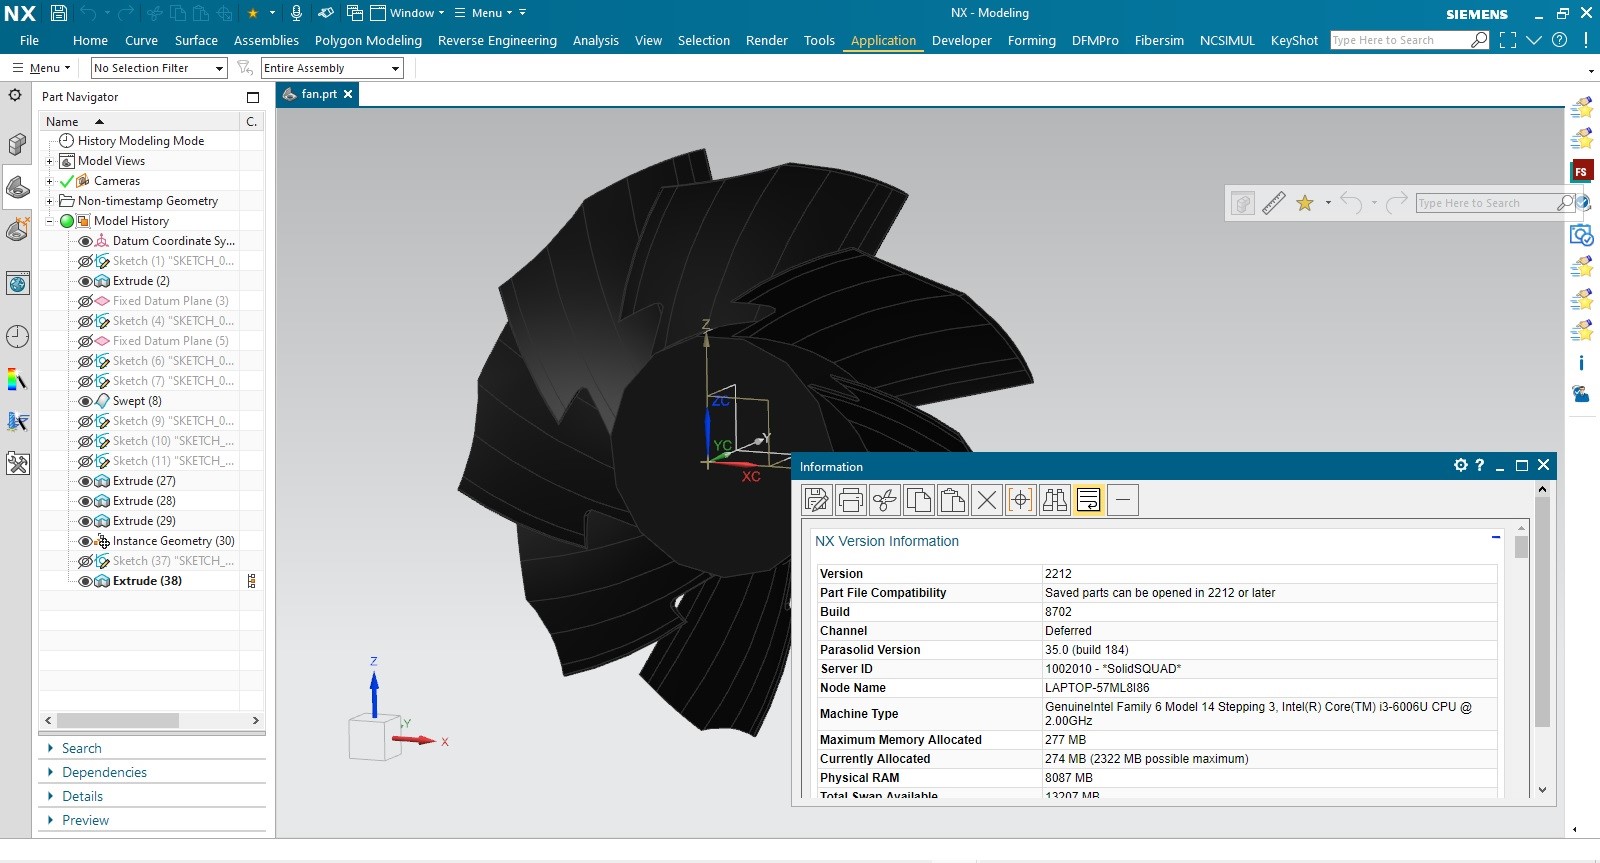 Working with Siemens NX 2212 Build 8702 full license